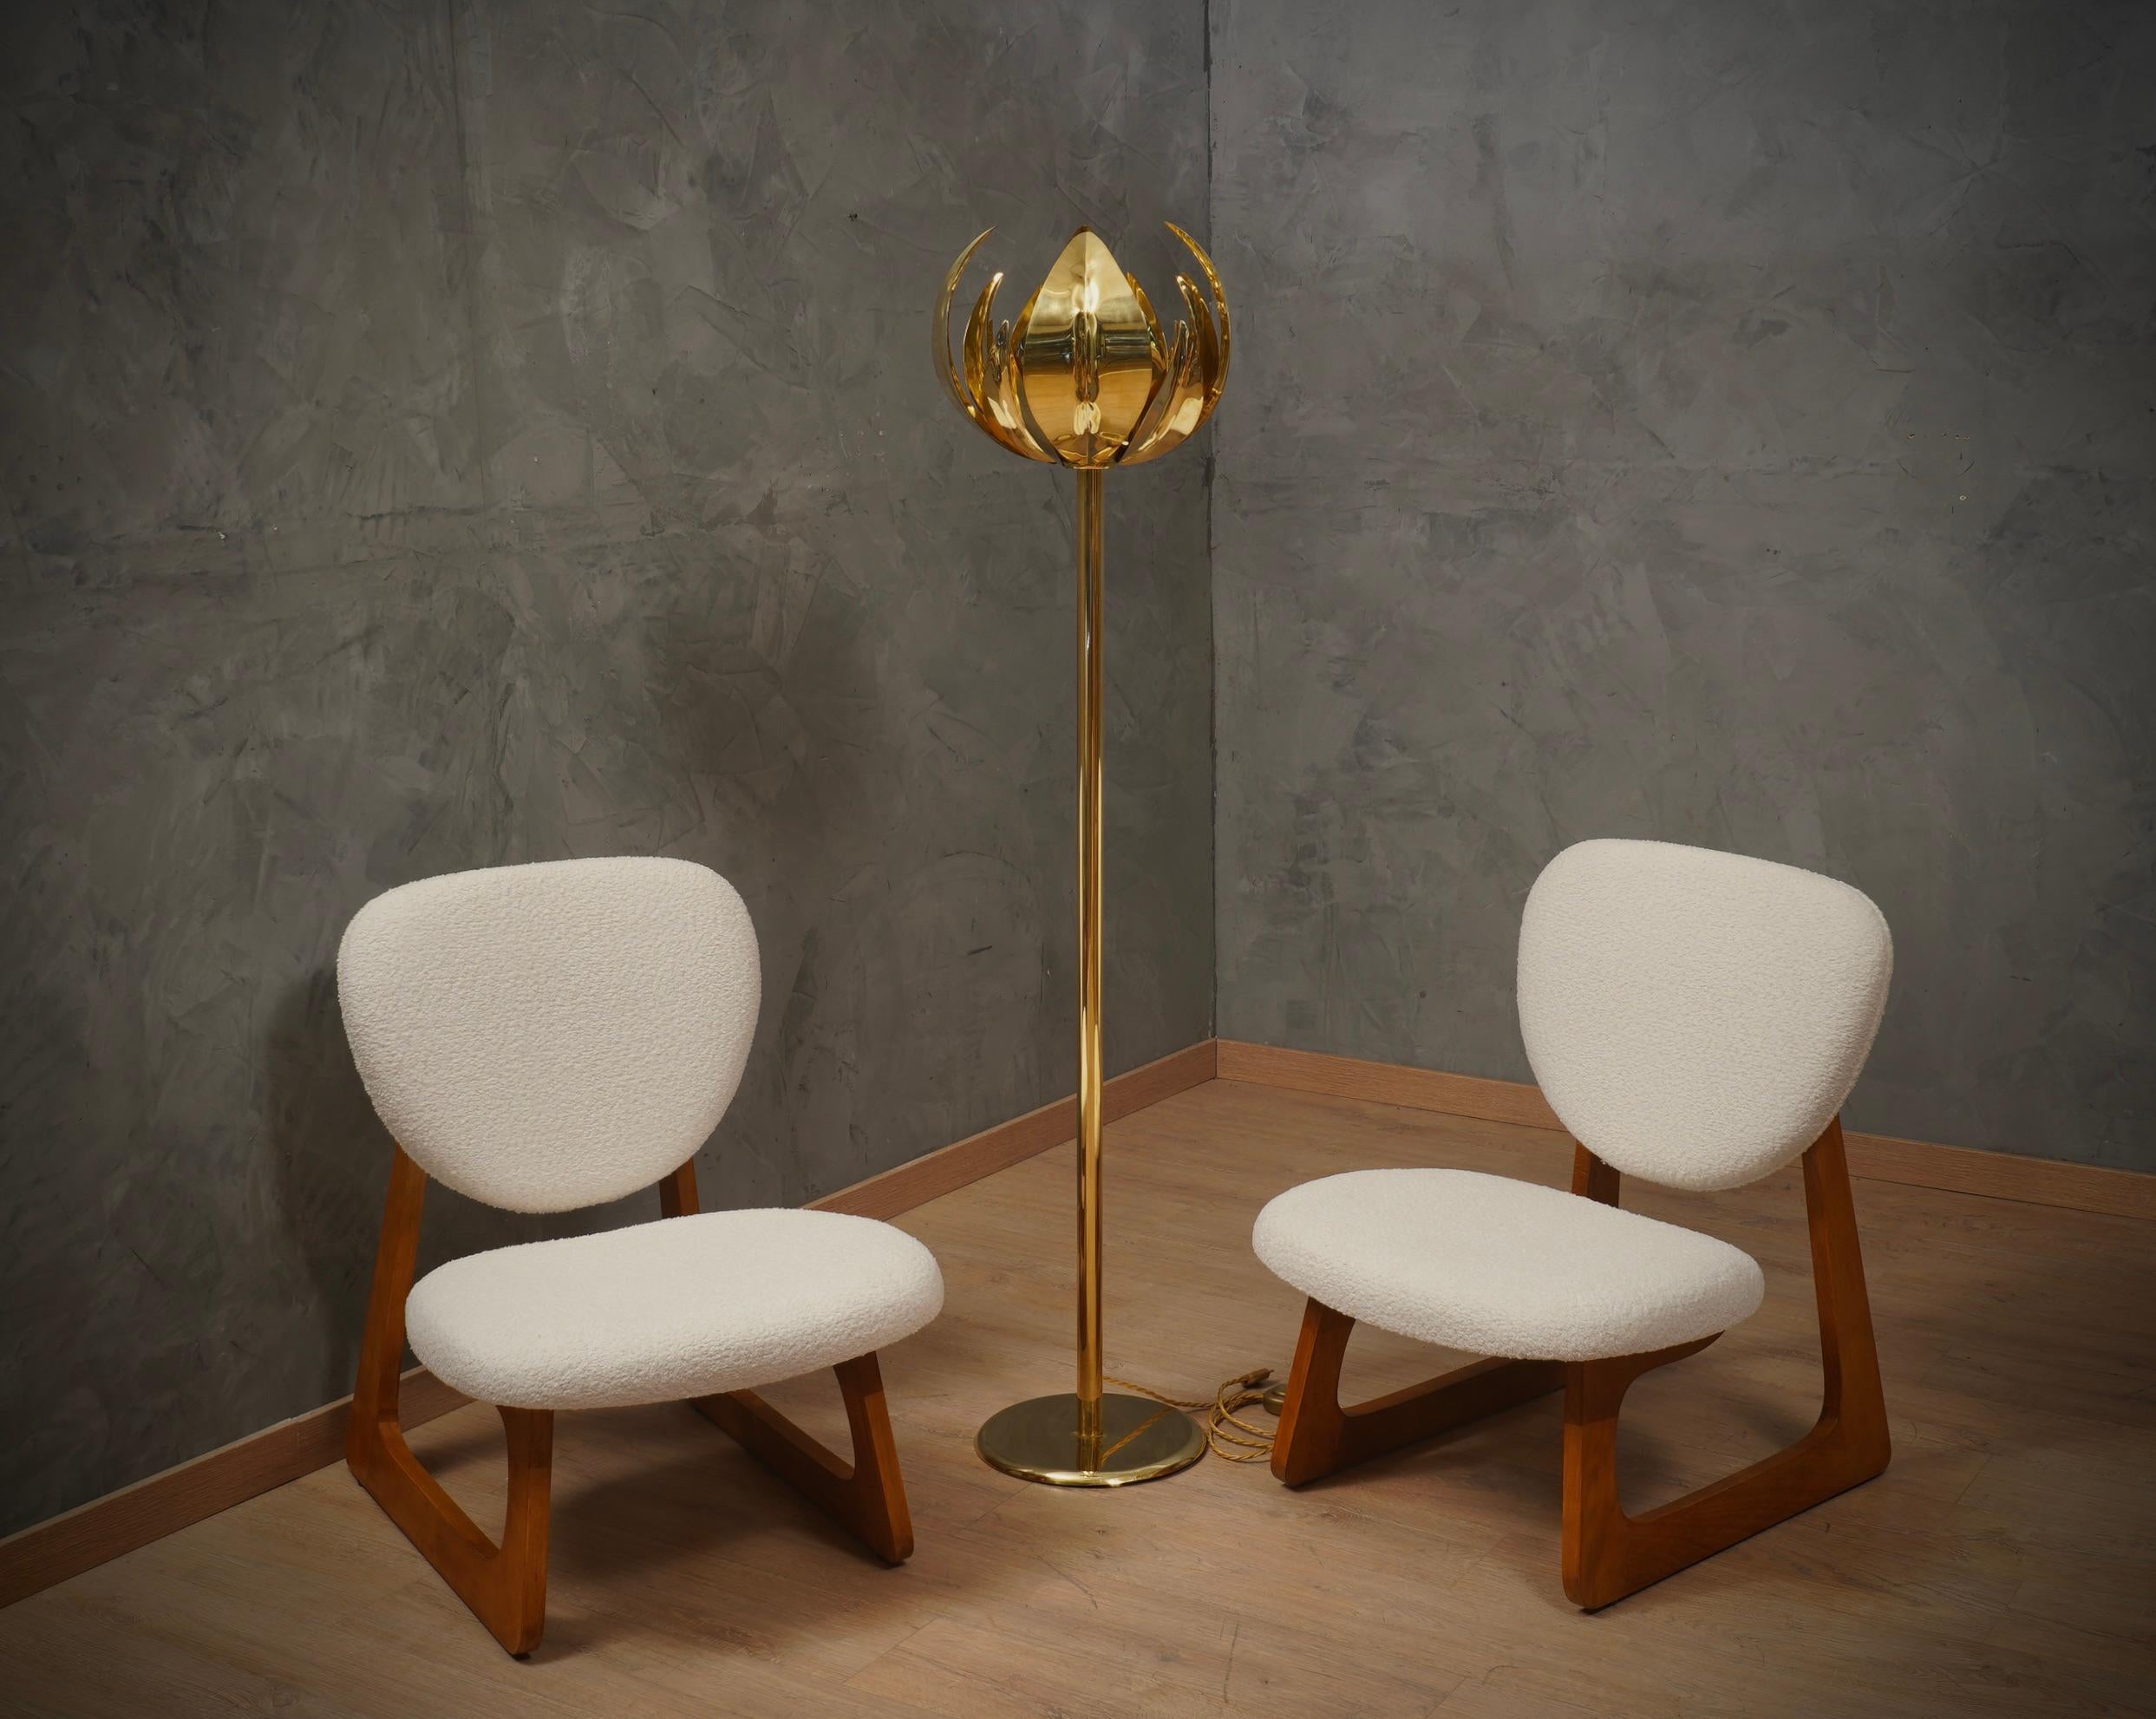 MidCentury Brass Italian Manufacturing Floor Lamp, 1940 In Good Condition For Sale In Rome, IT